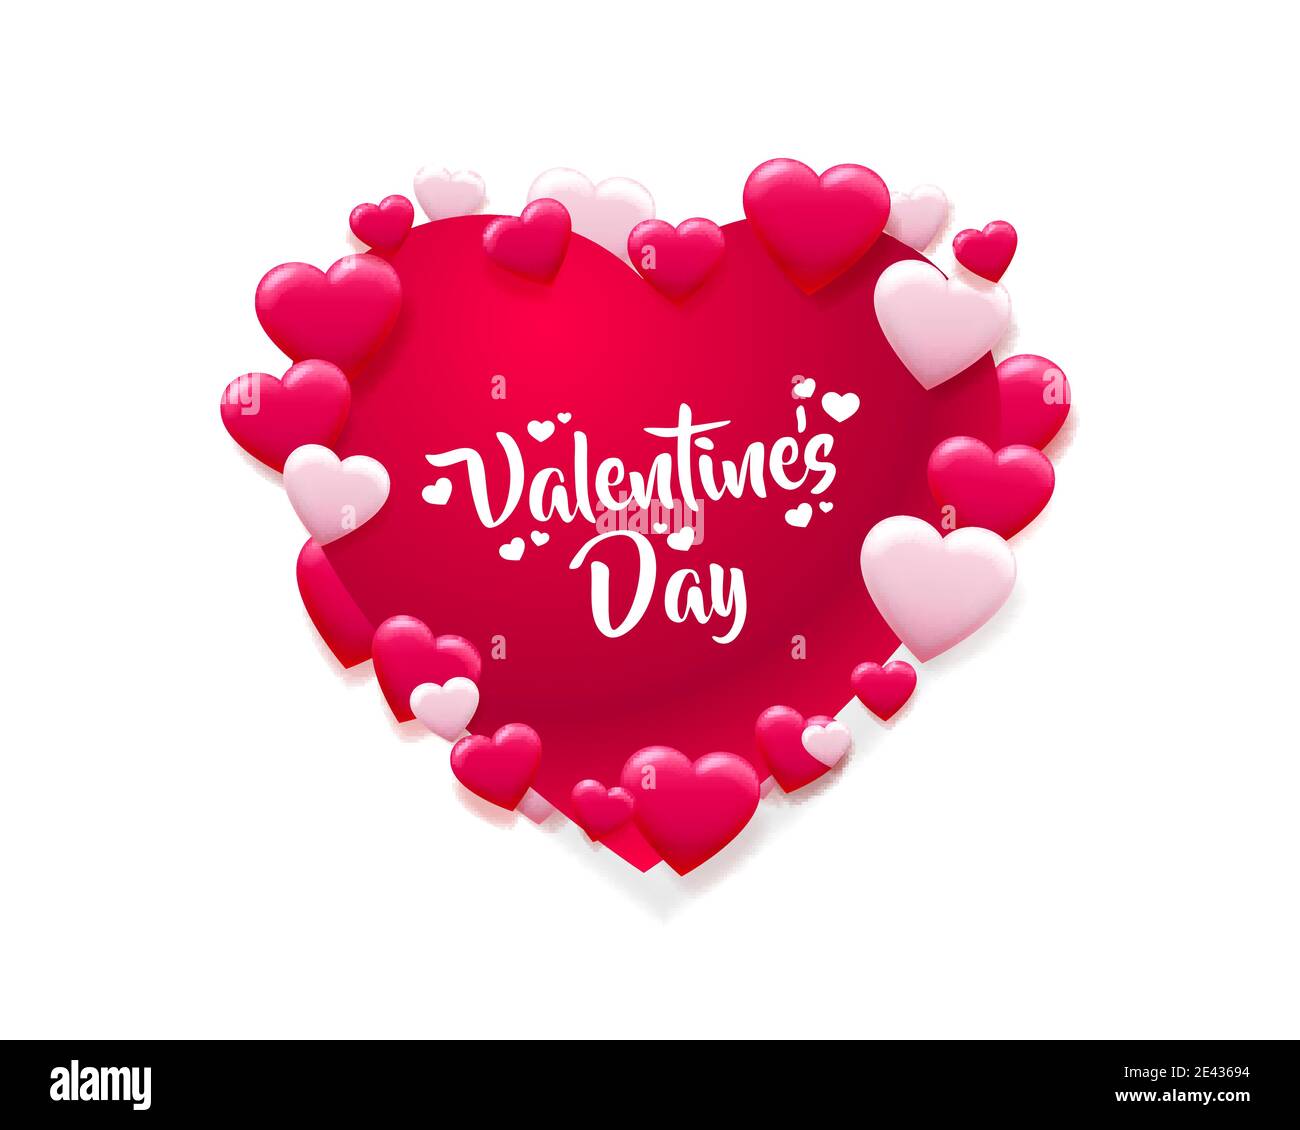 happy-valentines-day-greeting-postcard-a-pink-heart-made-of-small